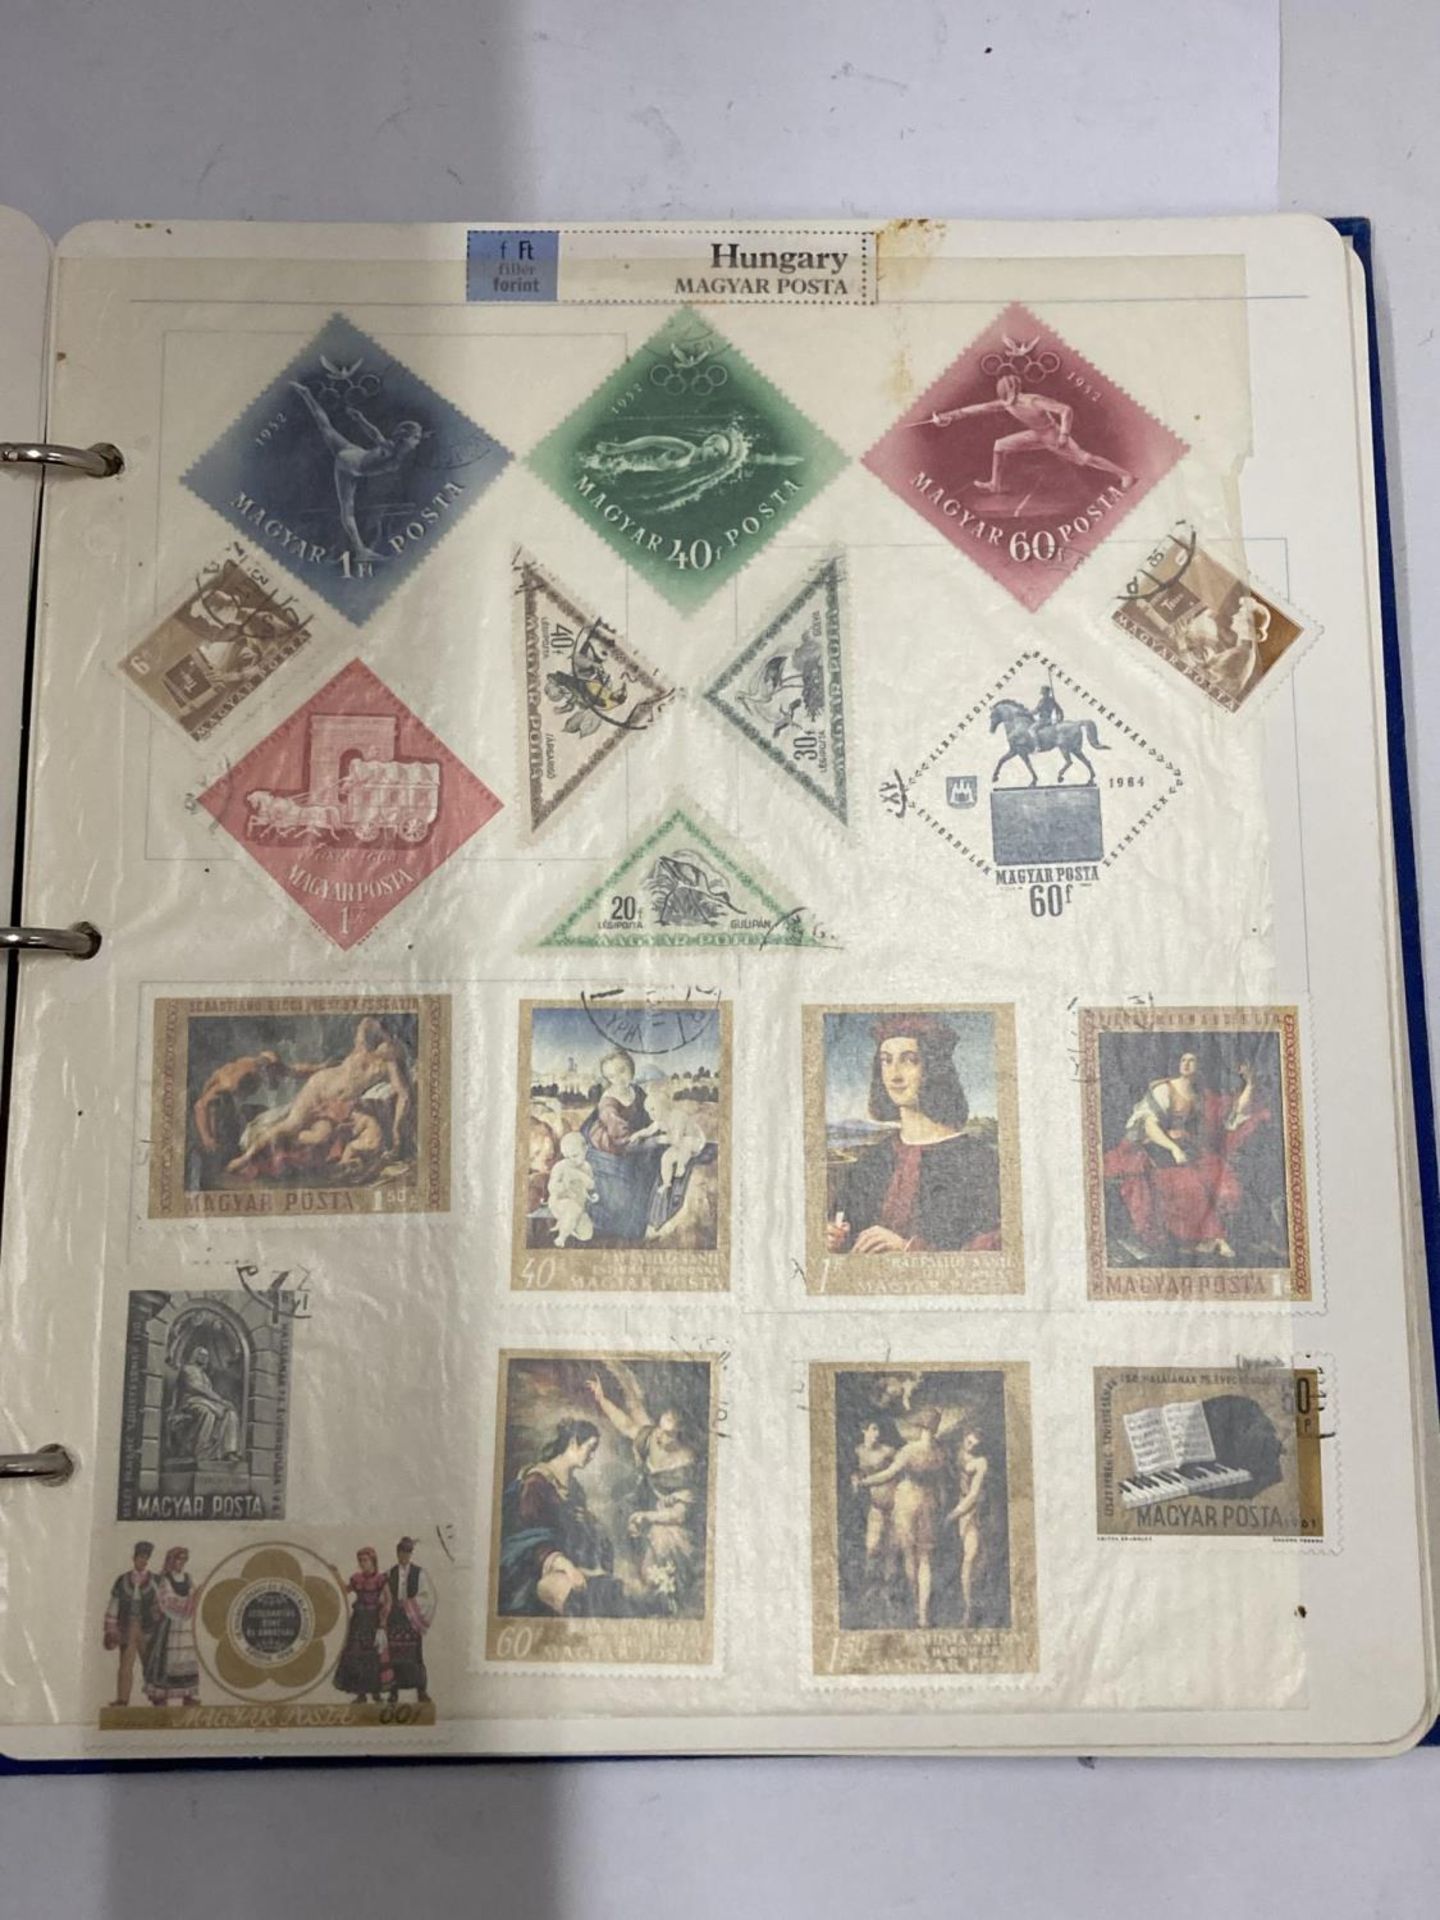 THE ROYAL FAMILY STAMP ALBUM OF WORLD STAMPS - HUNGARY, CUBA, POLAND ETC - Image 3 of 6